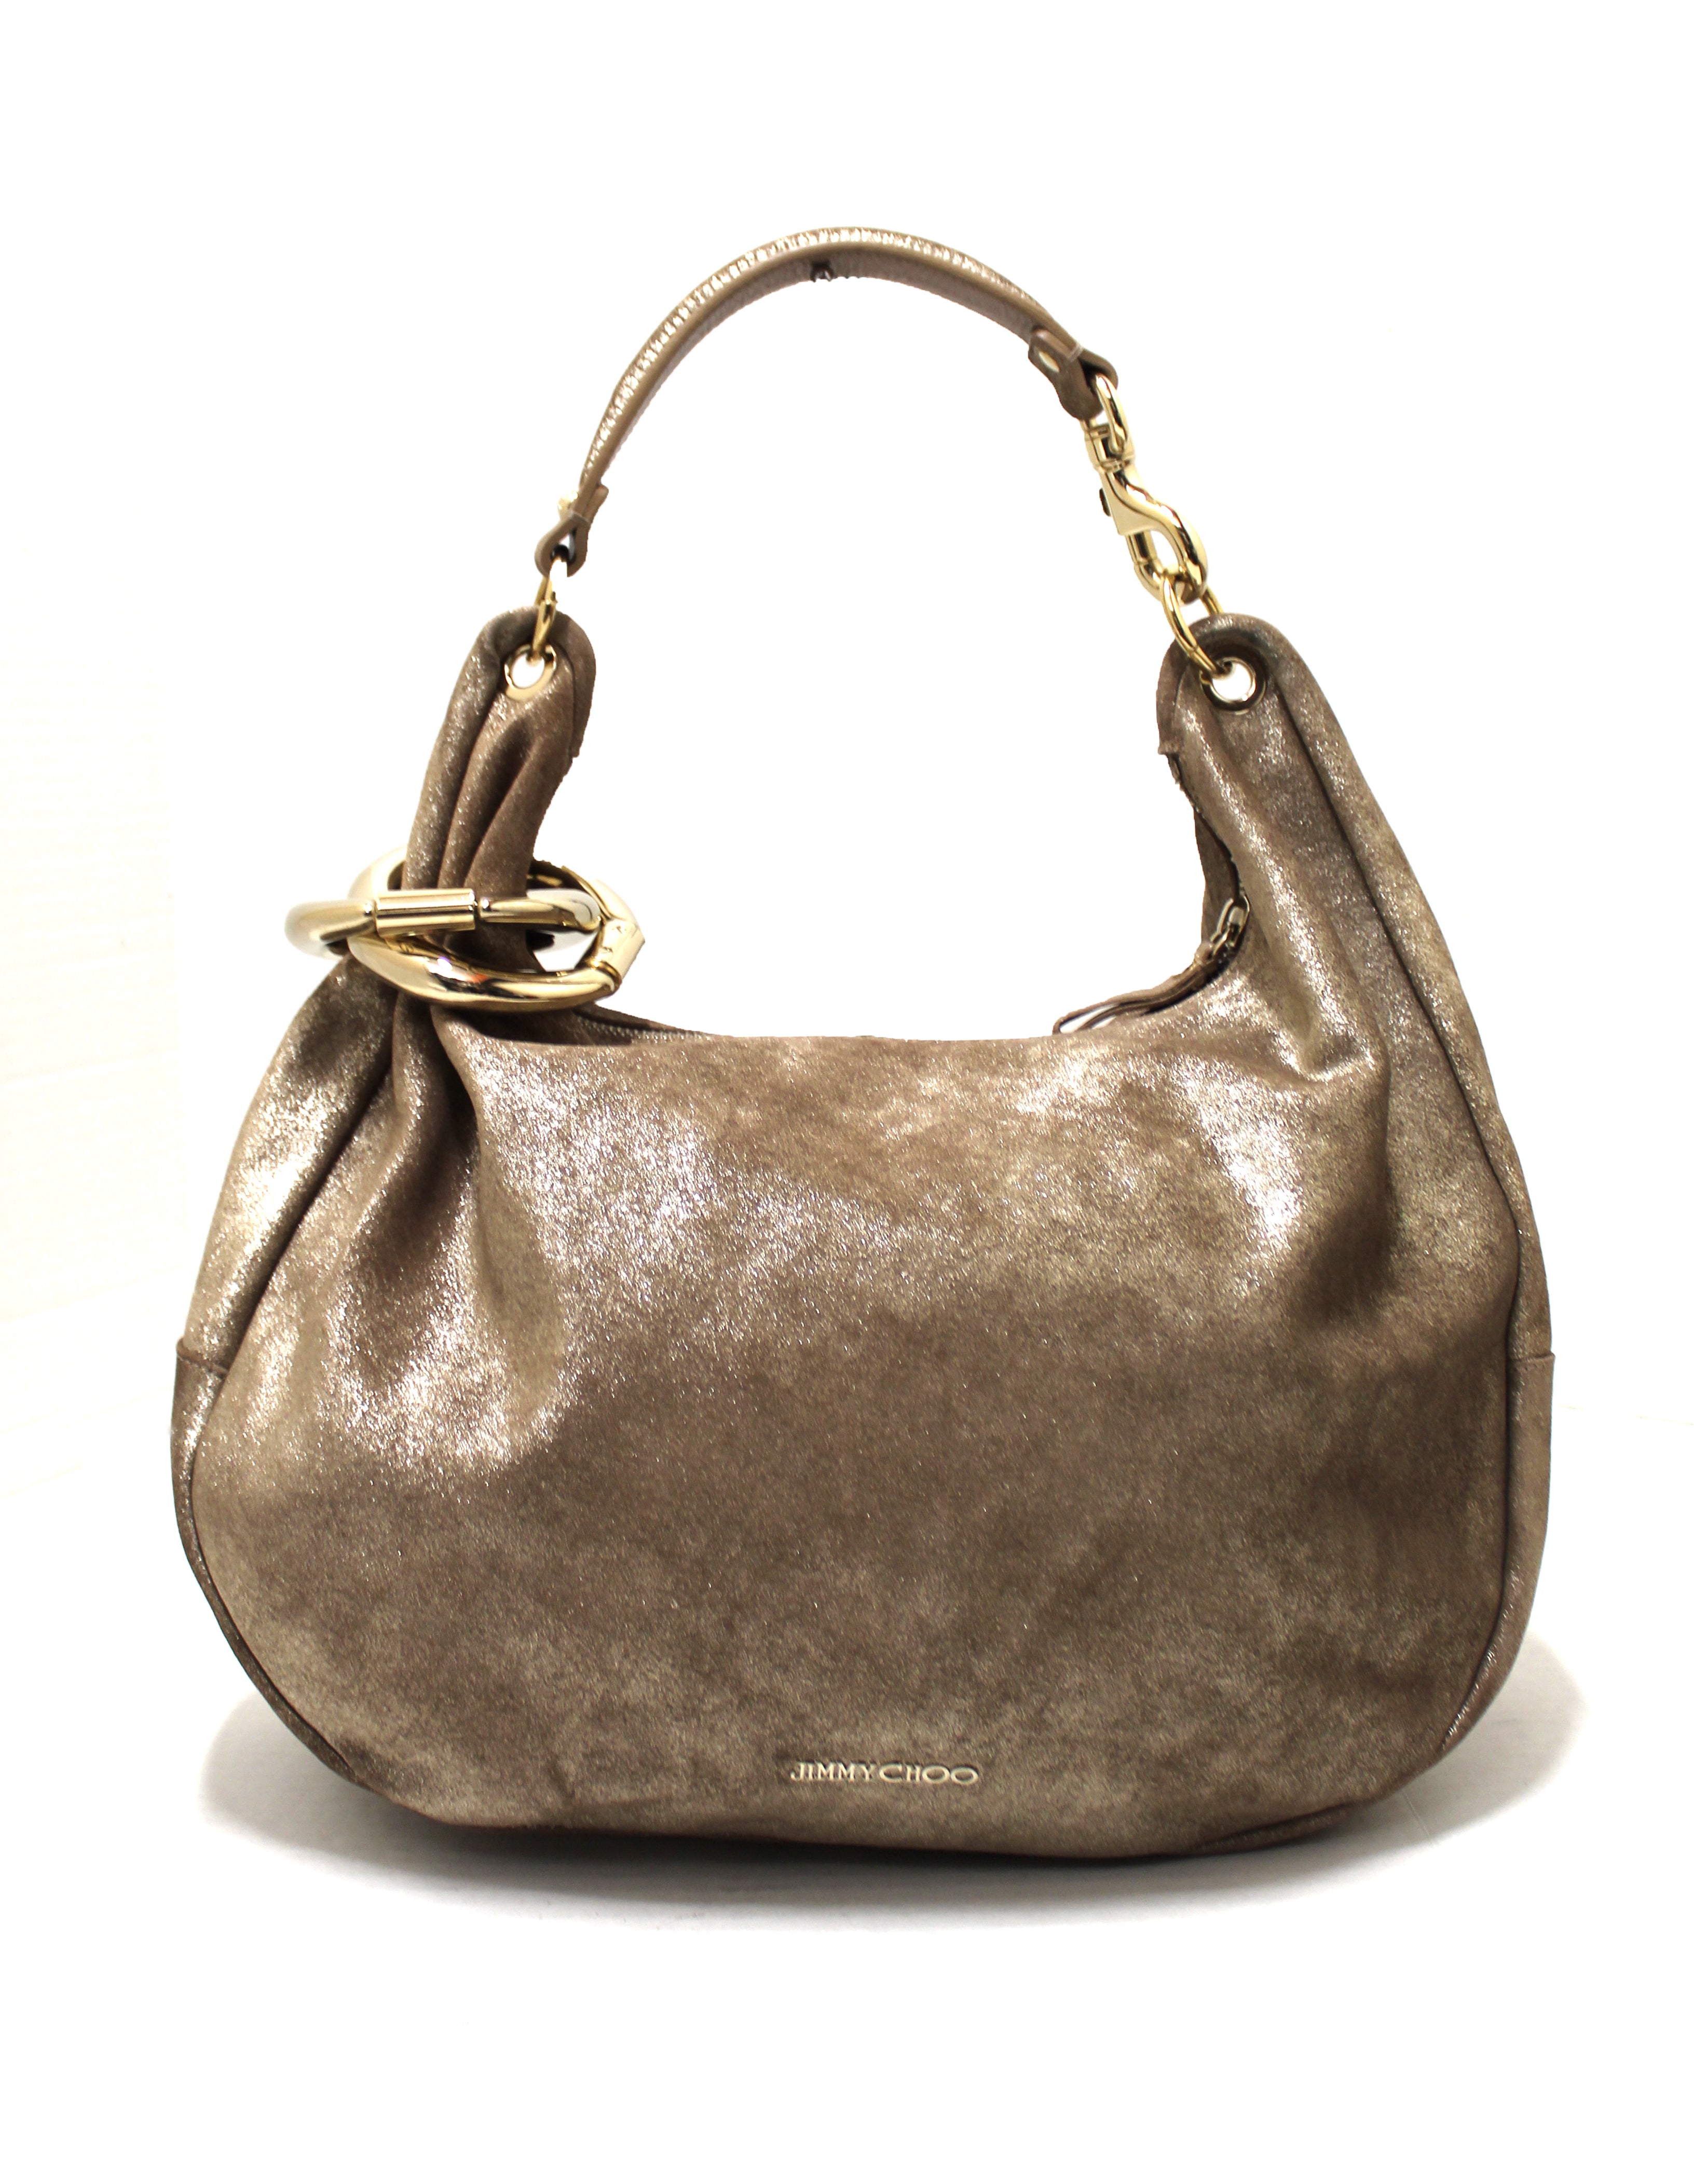 Authentic Jimmy Choo Metallic Gold Shimmer Suede Large Solar Hobo Shou ...